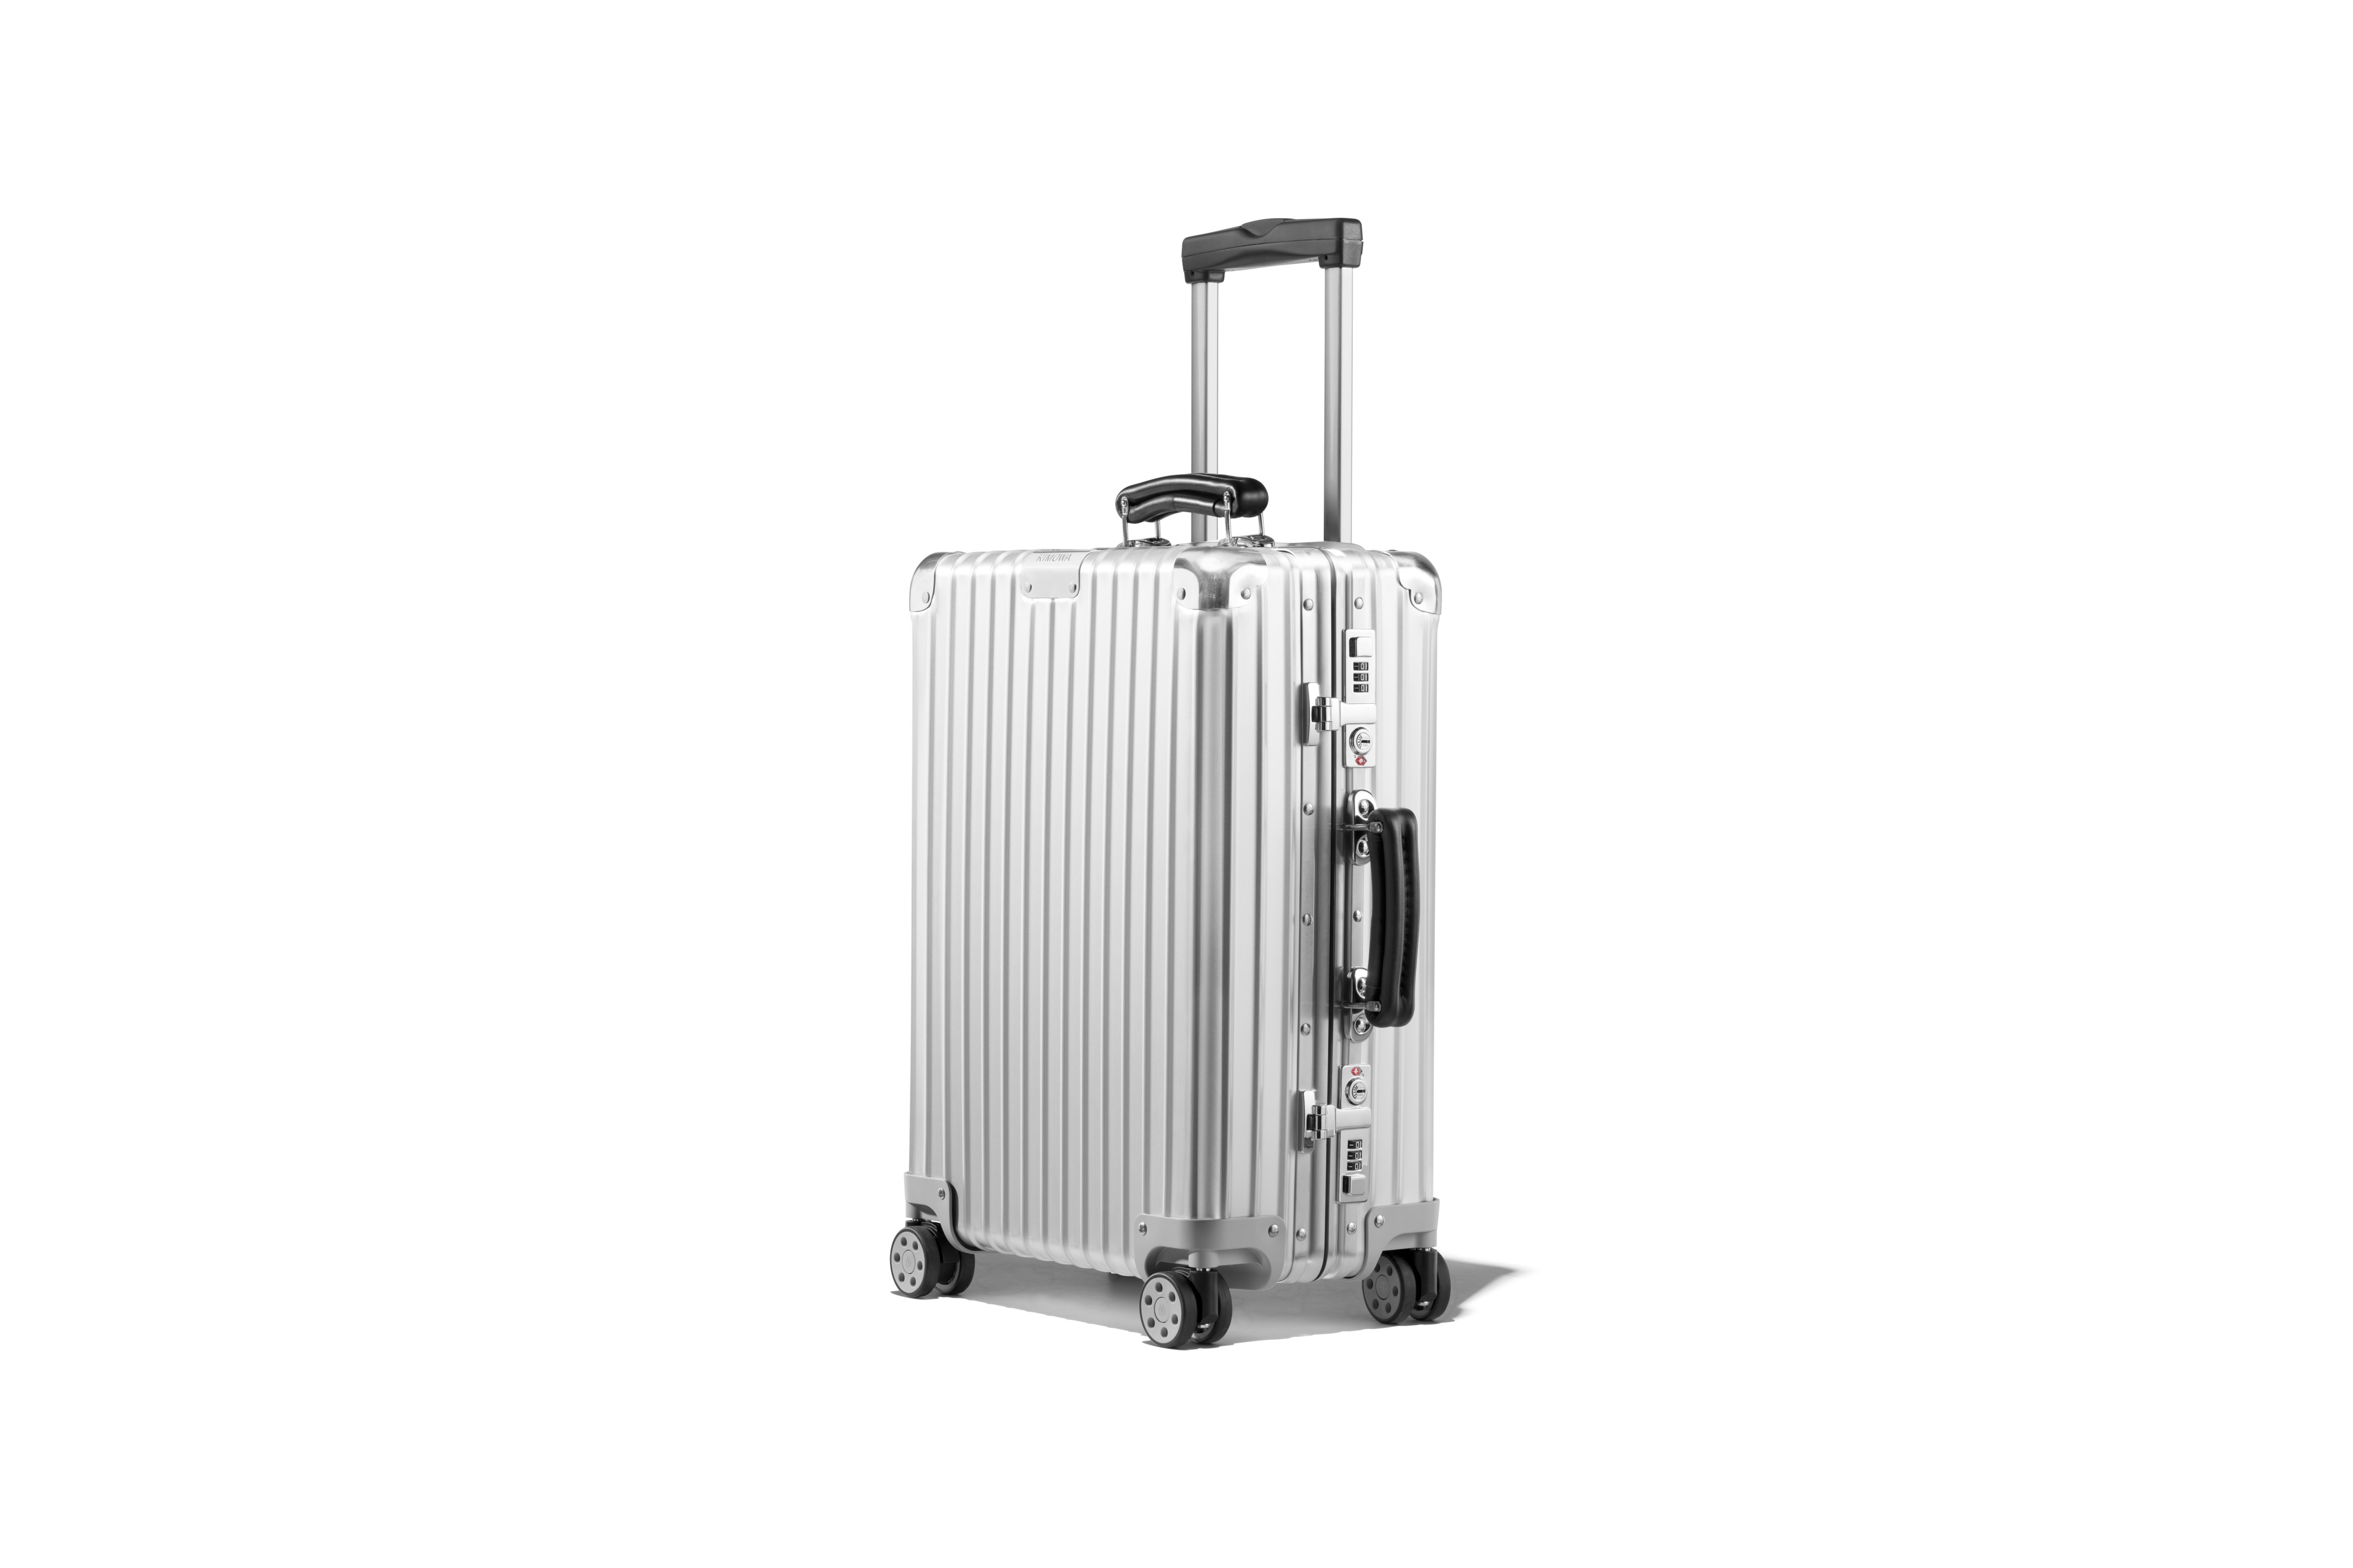 RIMOWA's New Travel Suitcase Collection Luggage Bag Vacation Summer Red Black White Silver Aluminium Design